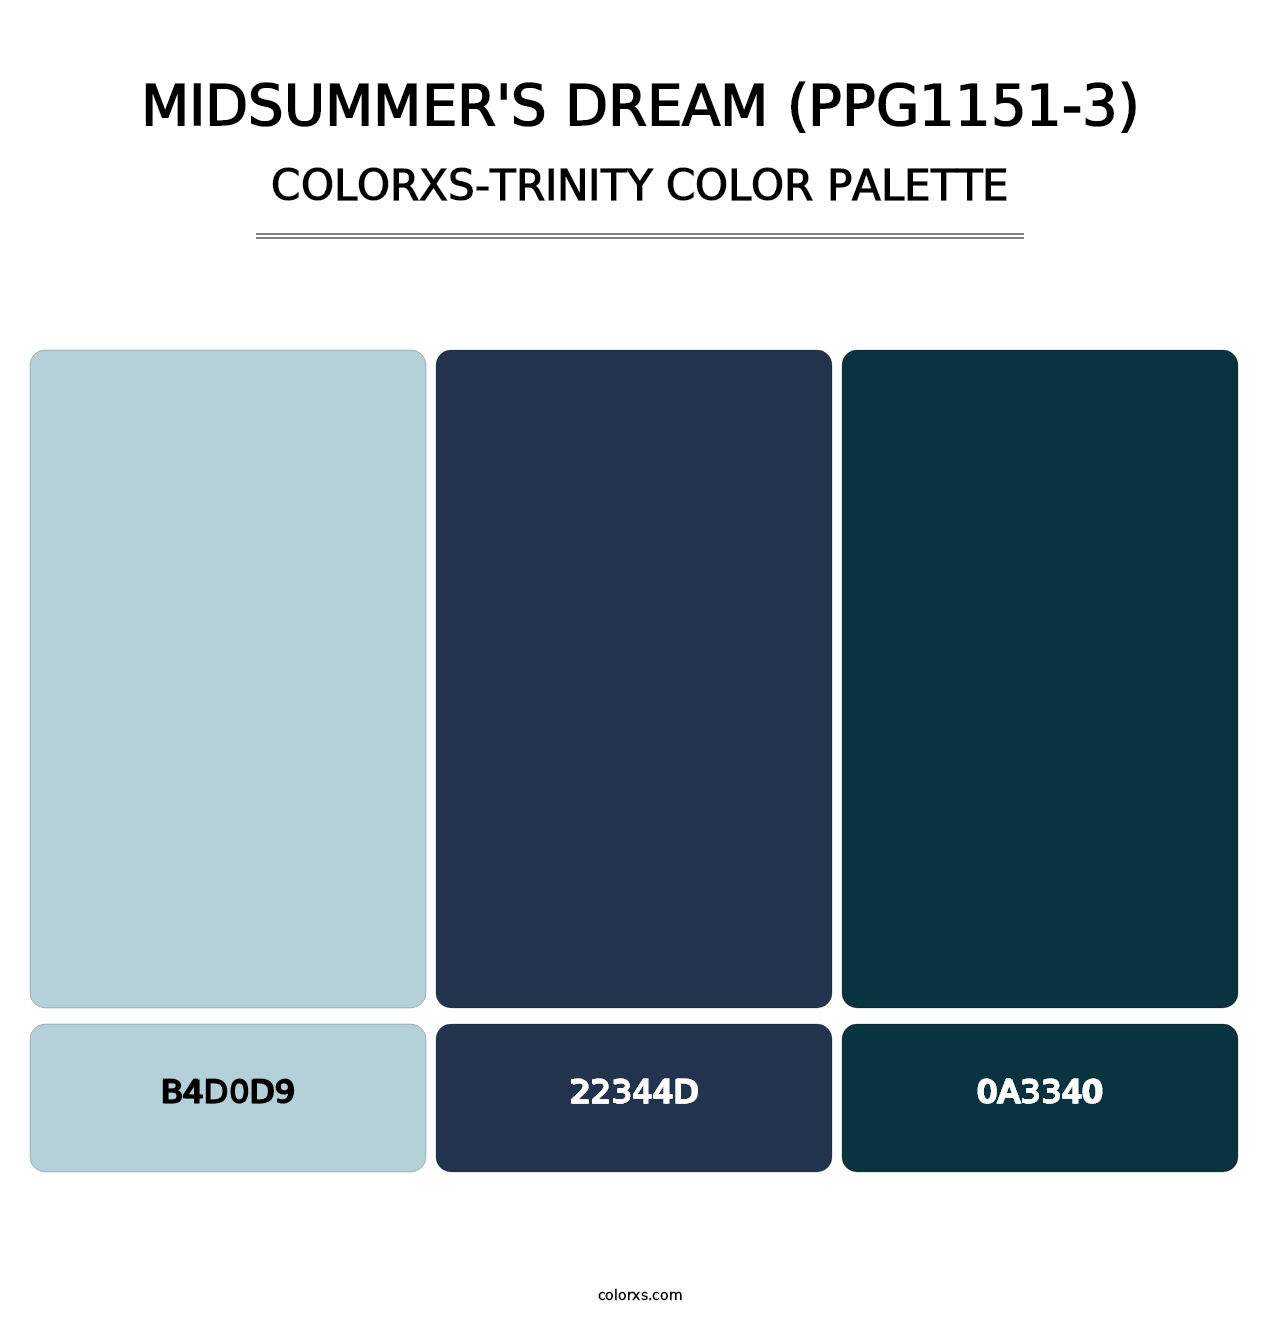 Midsummer's Dream (PPG1151-3) - Colorxs Trinity Palette